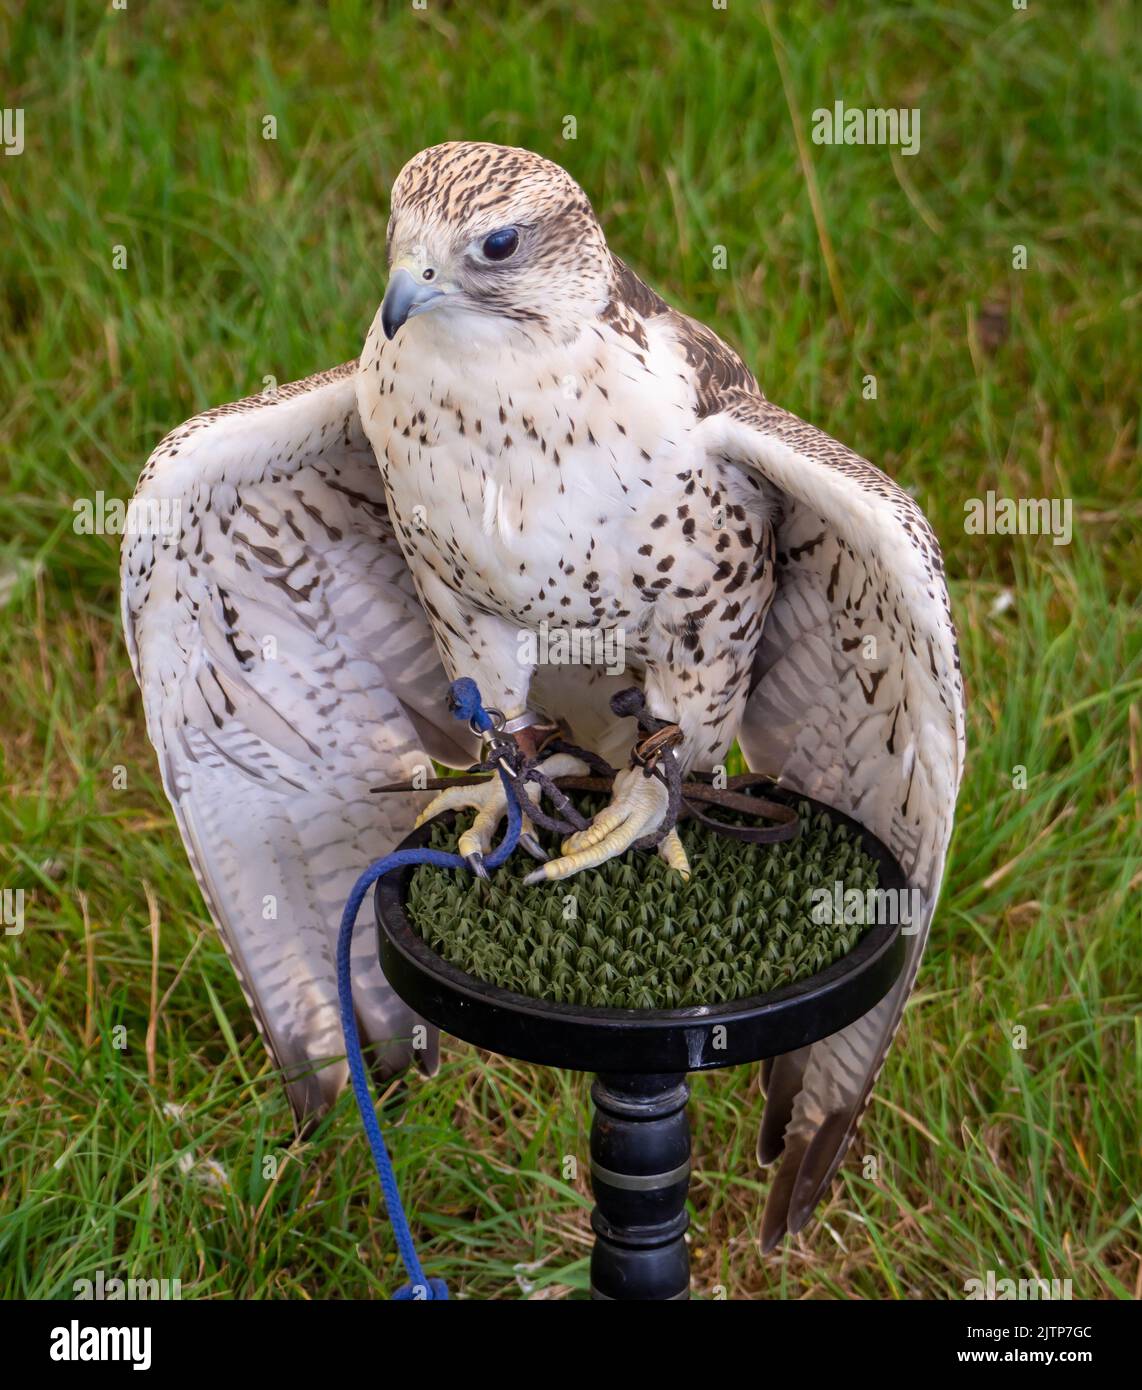 Gyrfalcon sat on its stand, looking to the left Stock Photo